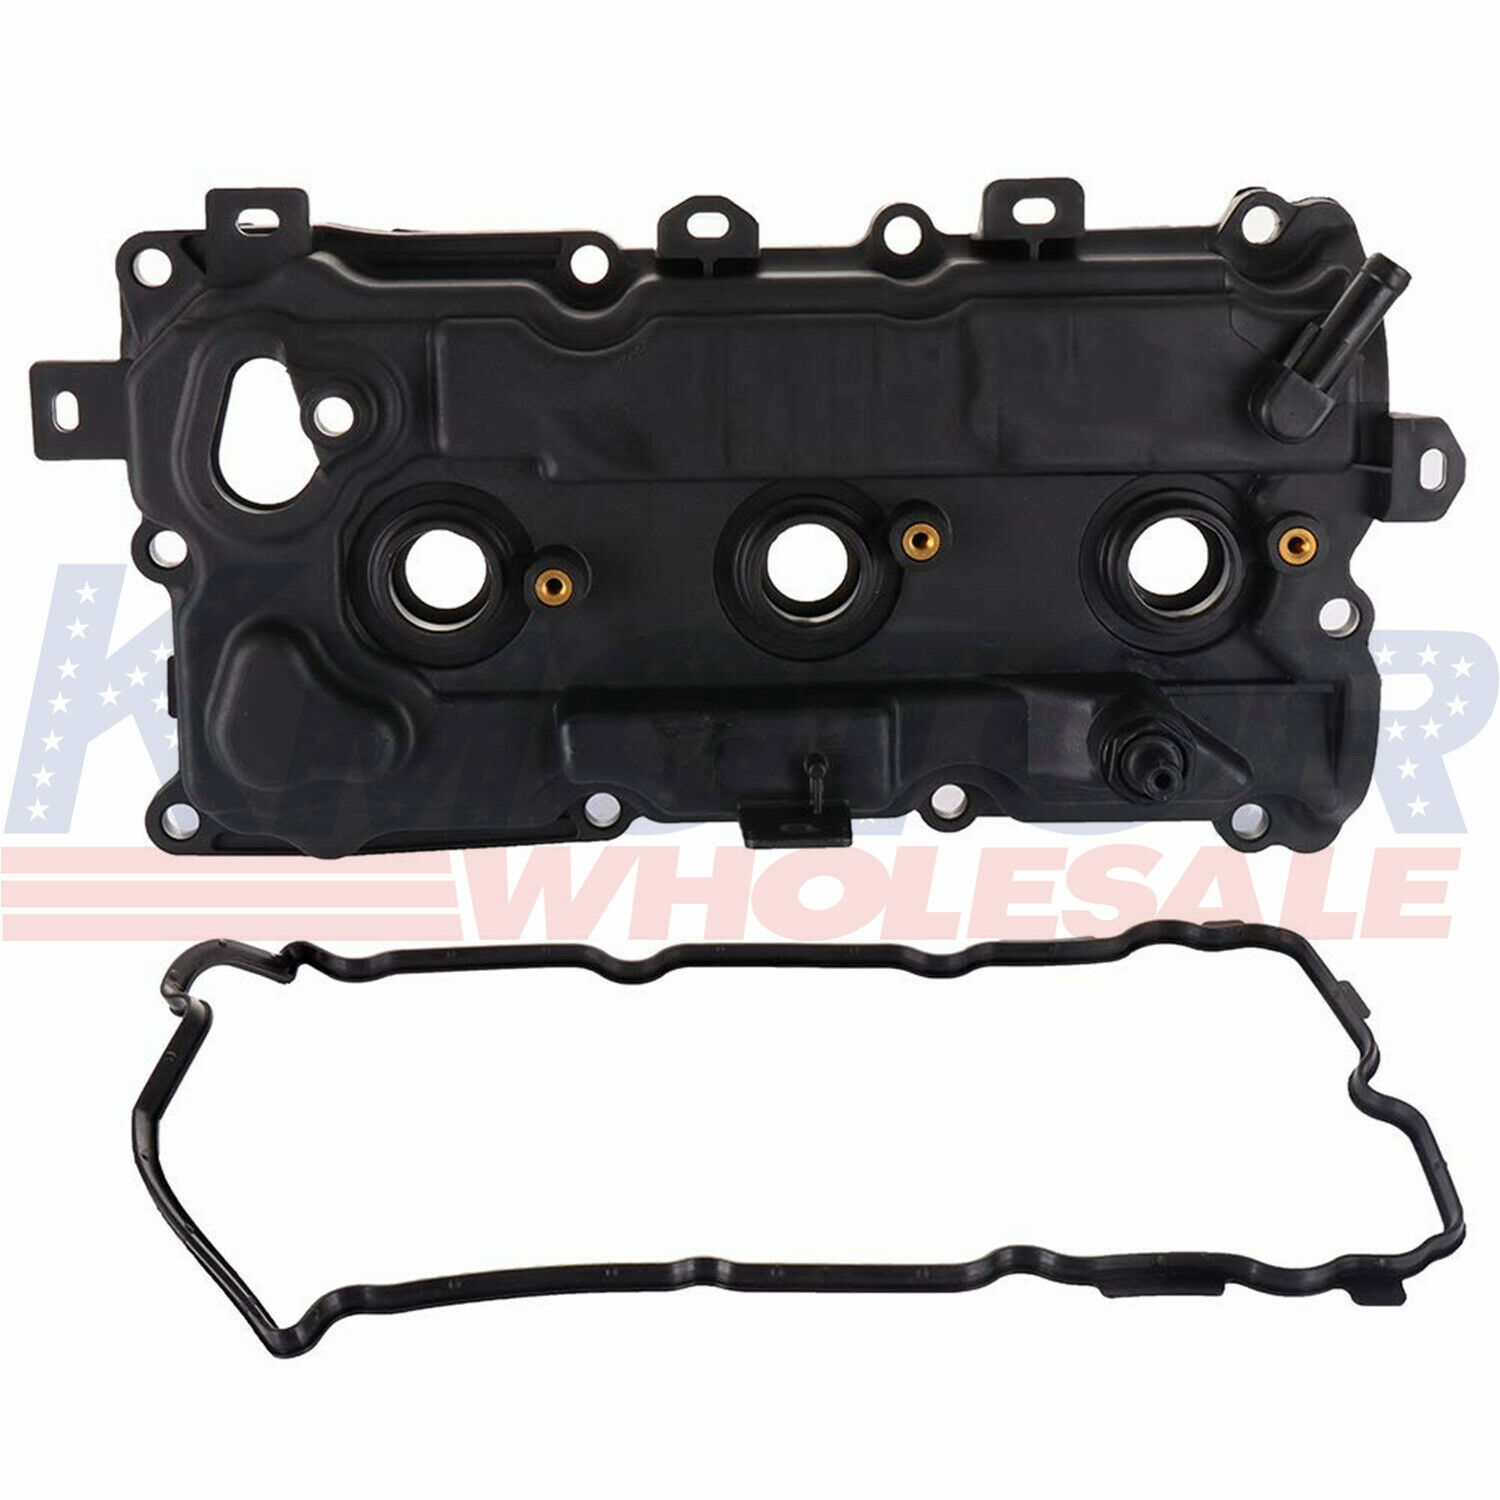 Engine Valve Cover 13264JP01A Right Fit For Nissan Murano Quest 2009-2014 3.5L